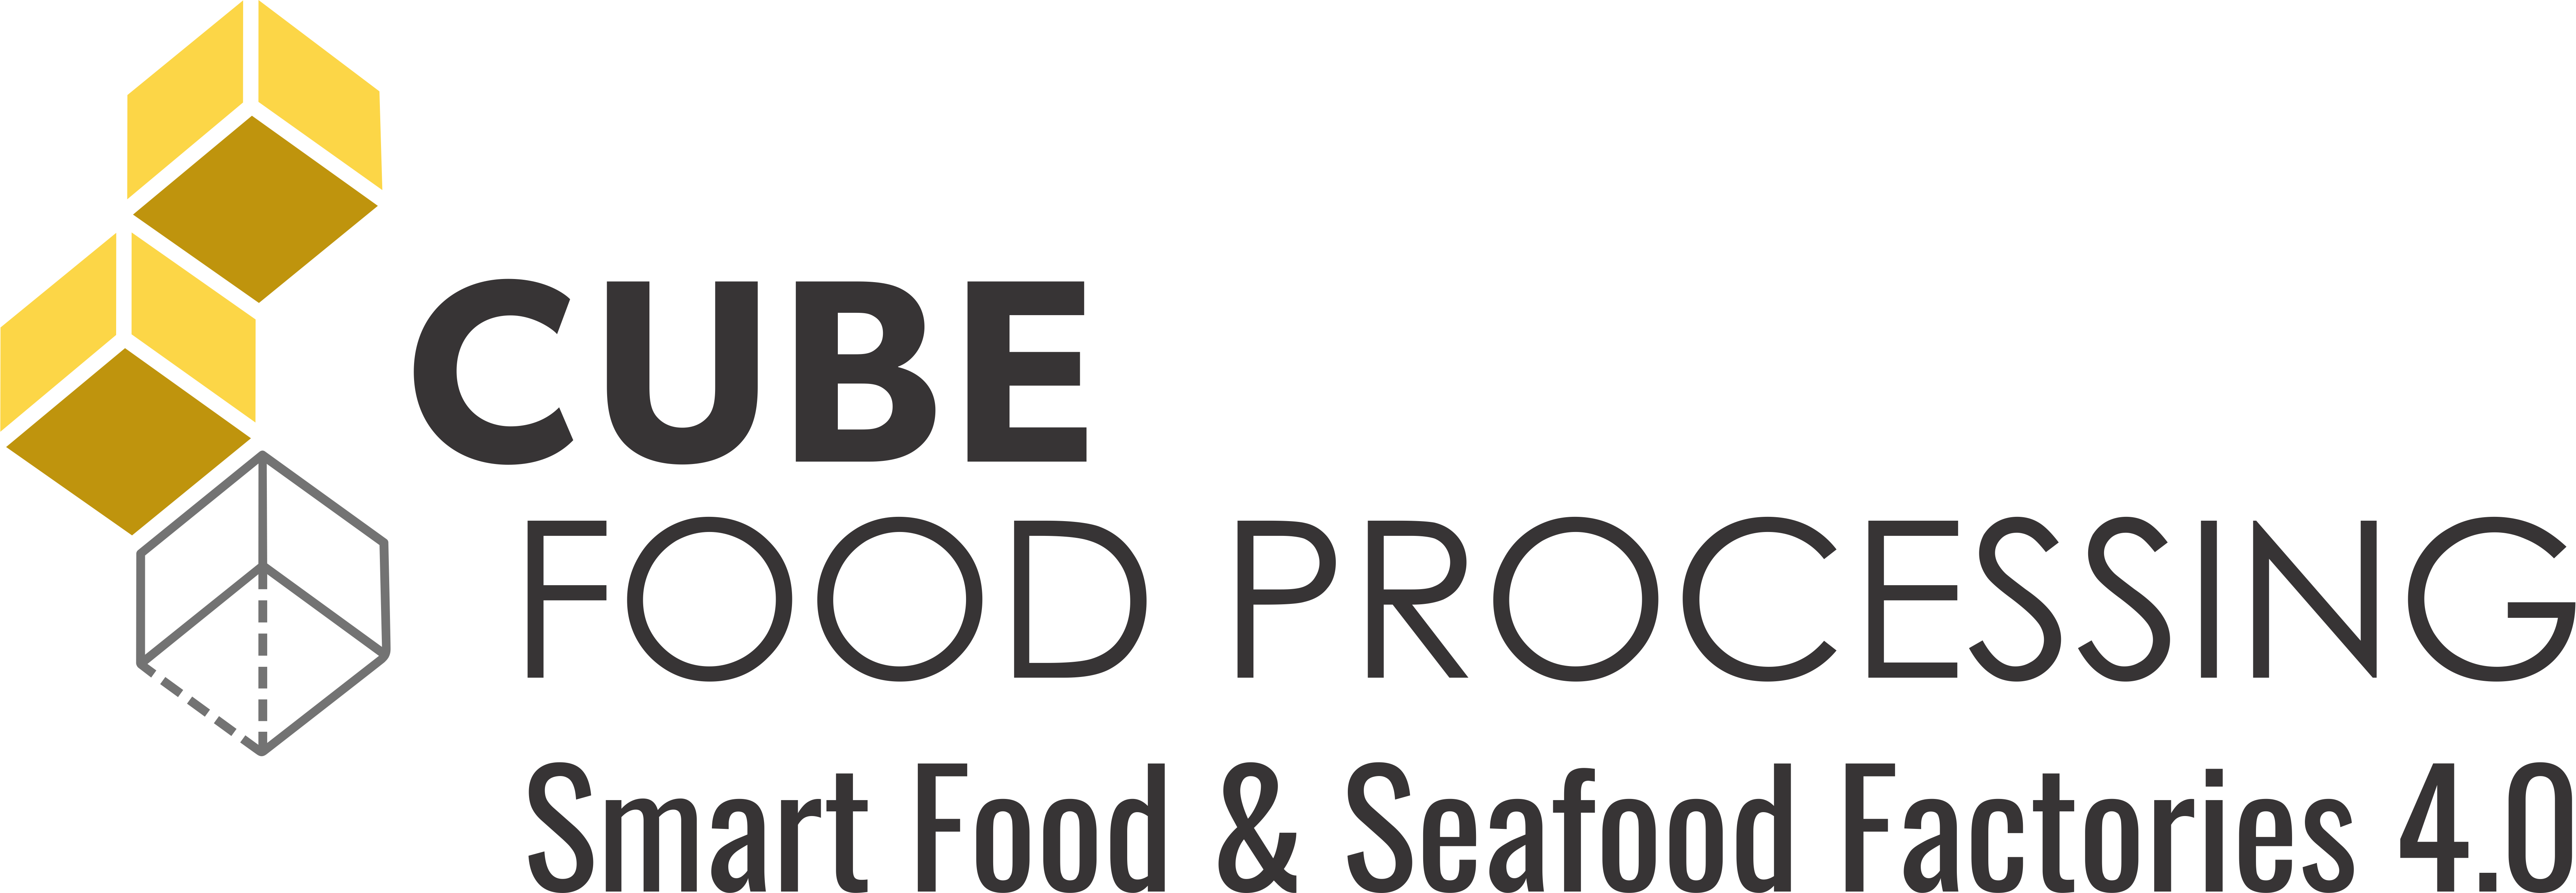 Food and Seafood Process Efficiency Experts